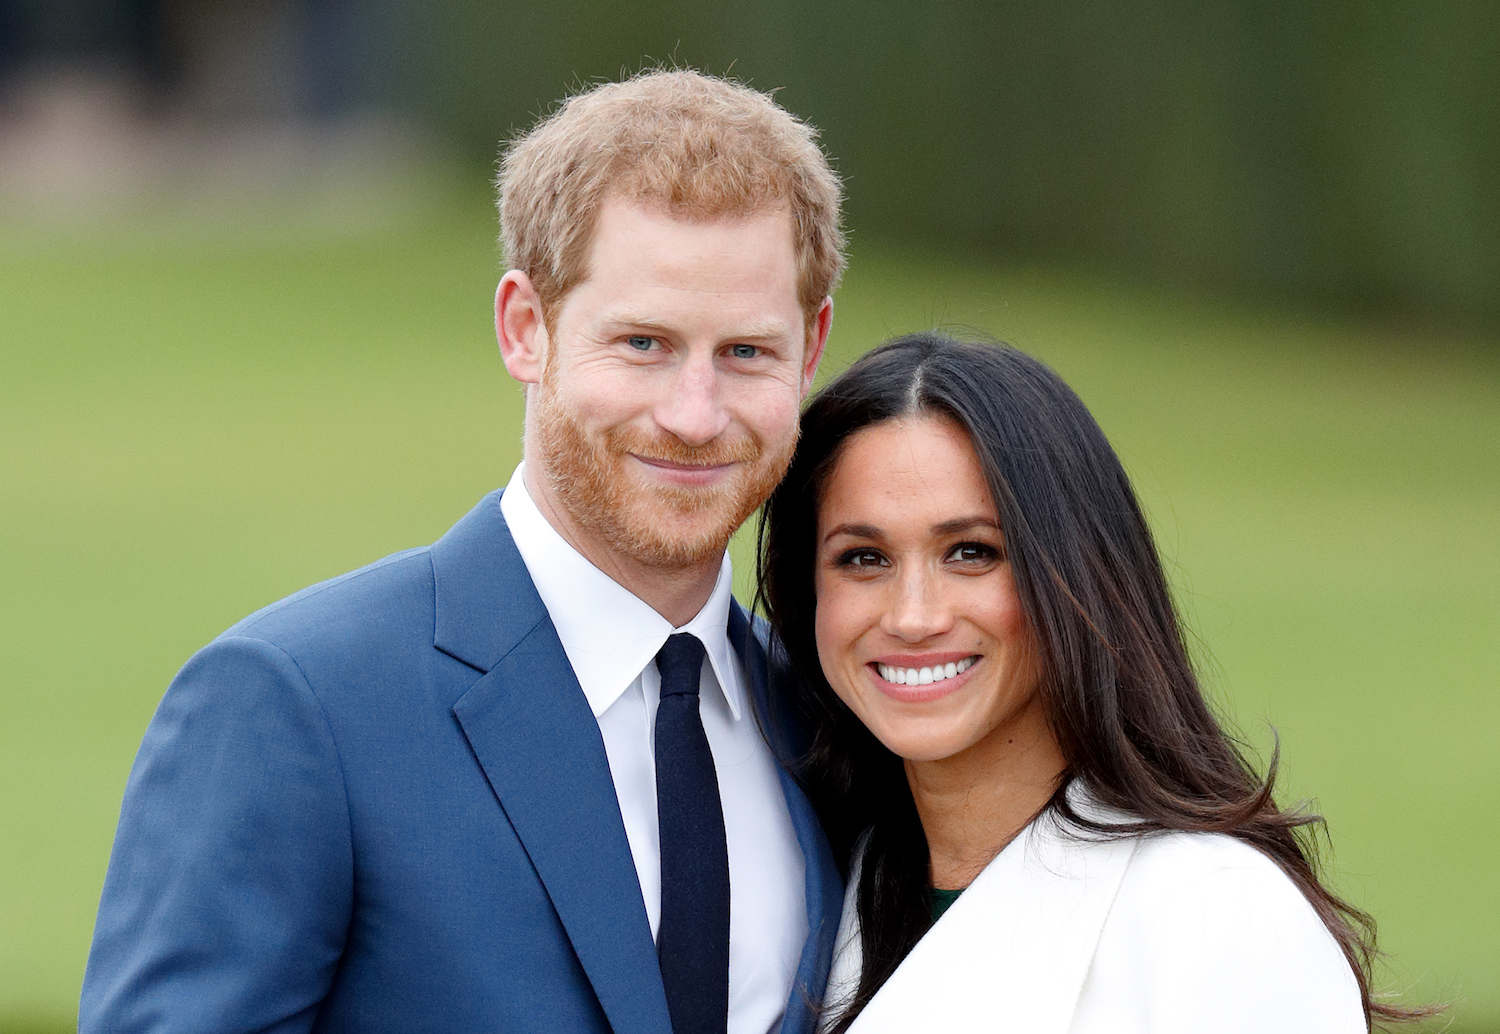 A Never-Before-Seen Engagement Portrait Of Harry And Meghan Just Surfaced